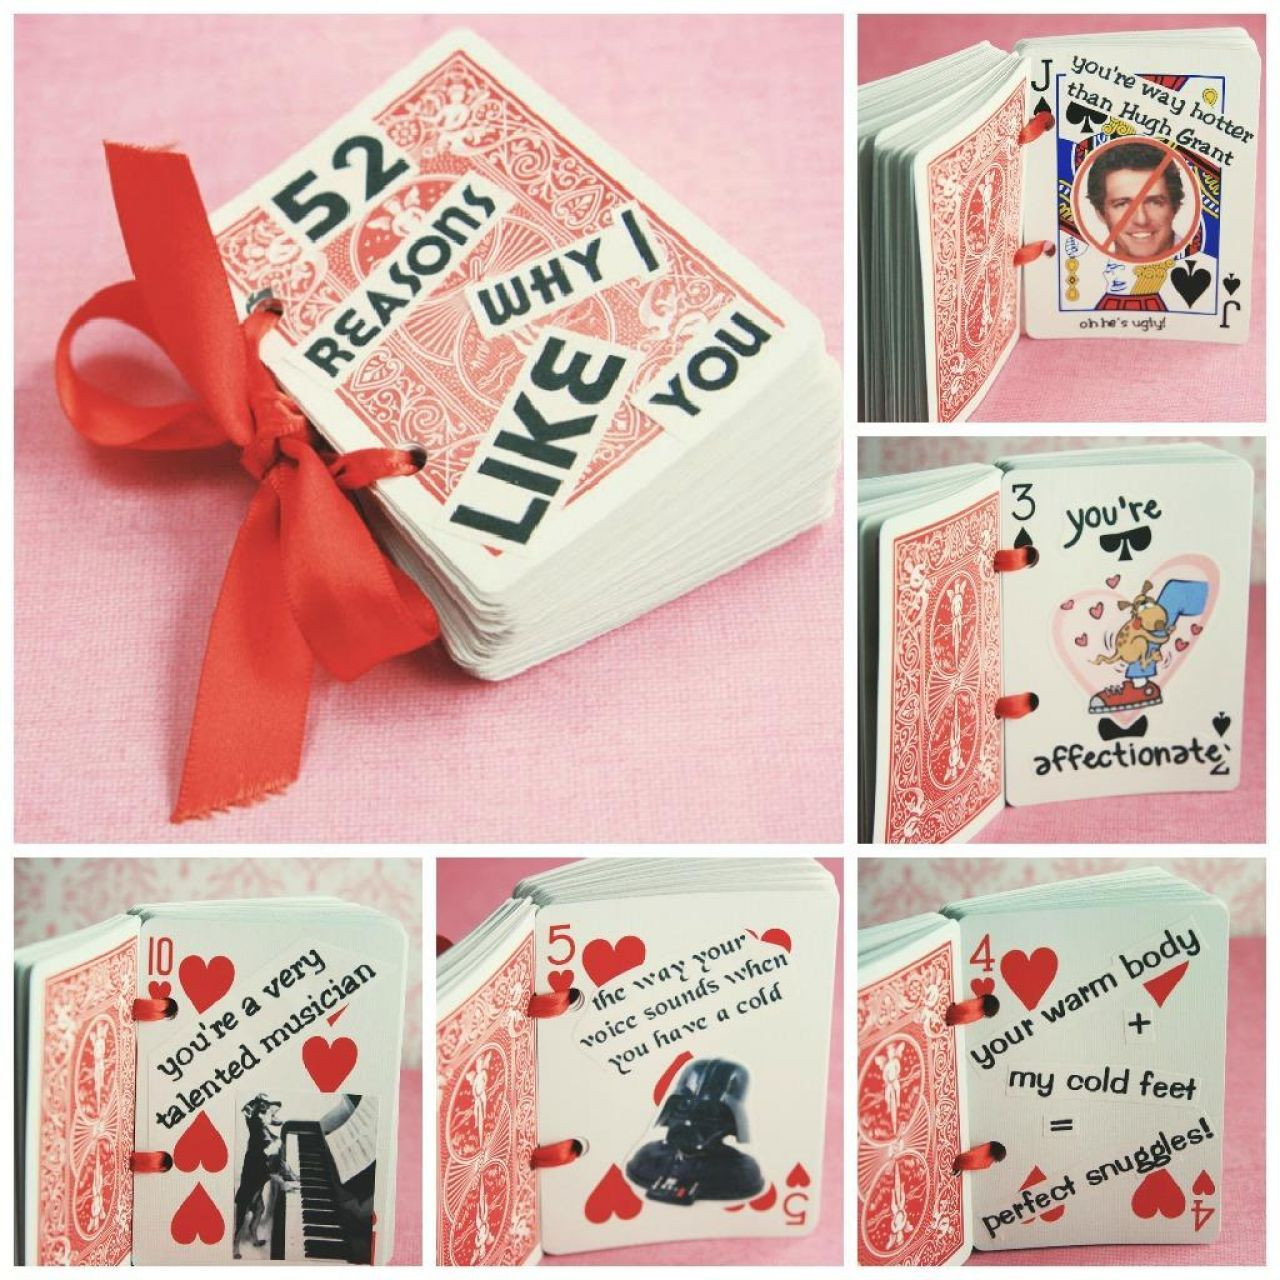 Last Minute Valentines Gift Ideas
 17 Last Minute Handmade Valentine Gifts for Him